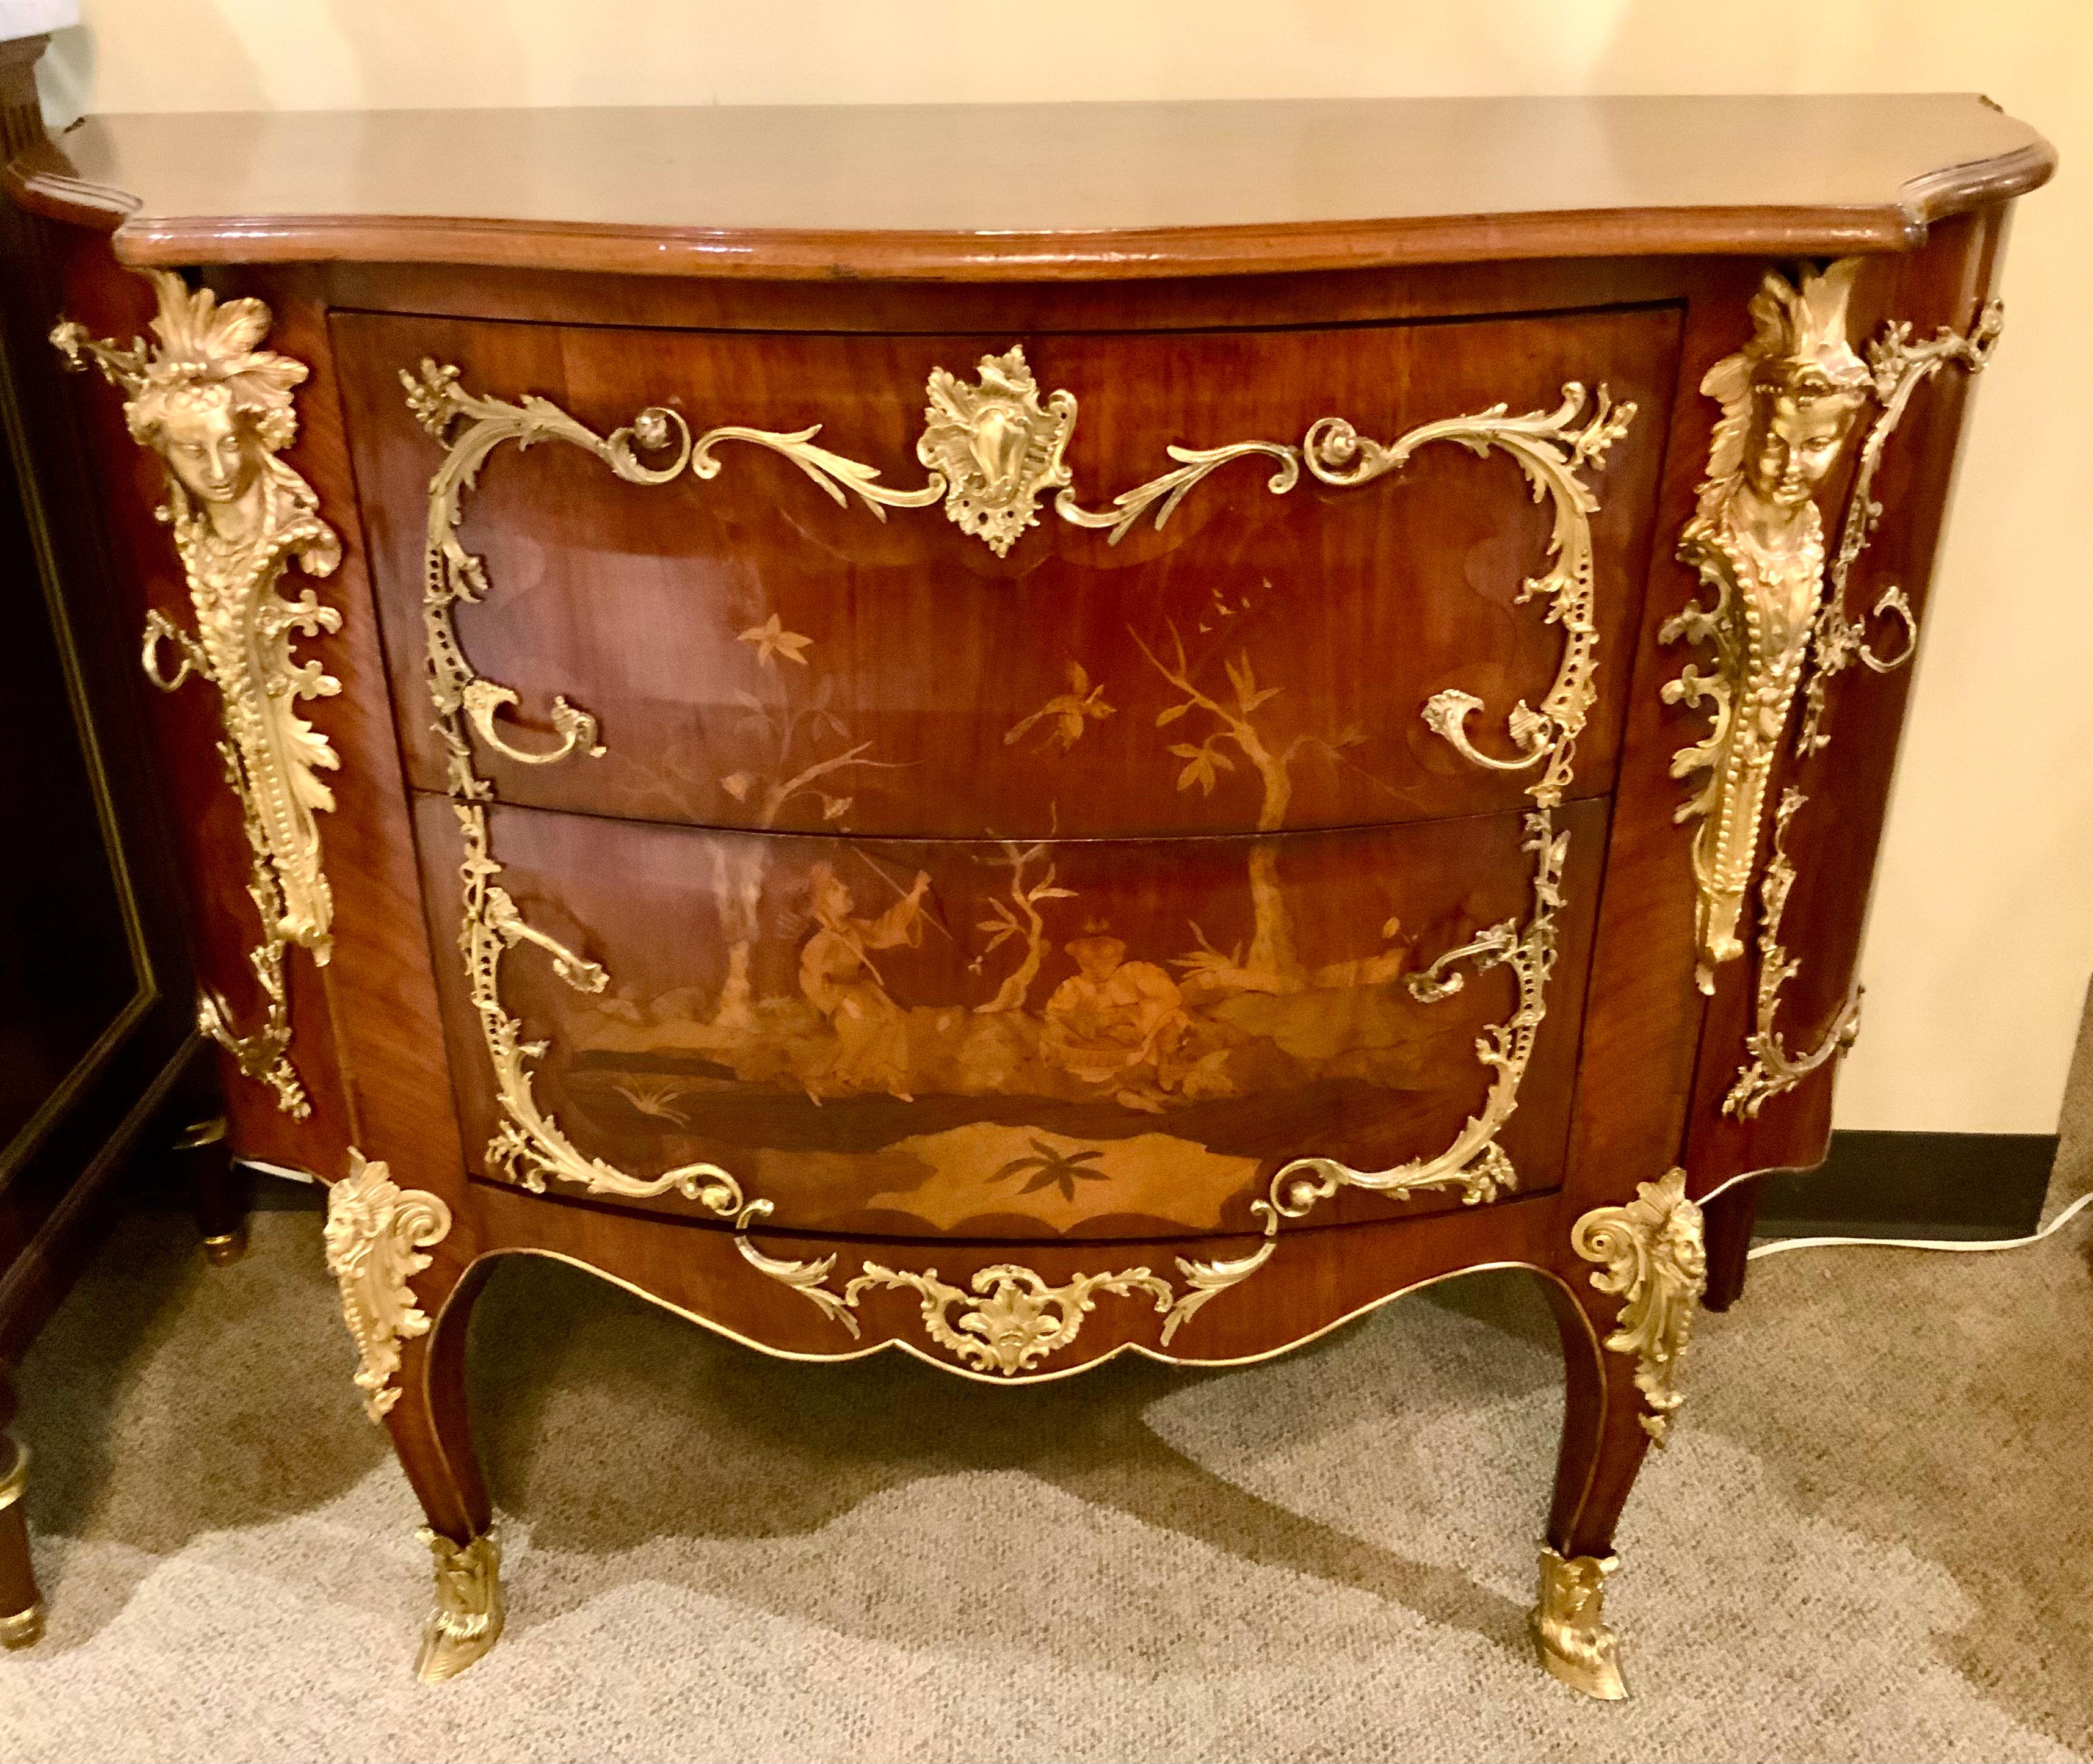 Pair of Louis XIV-Style Mahogany Inlaid Marquetry Commodes, 19th Century For Sale 7